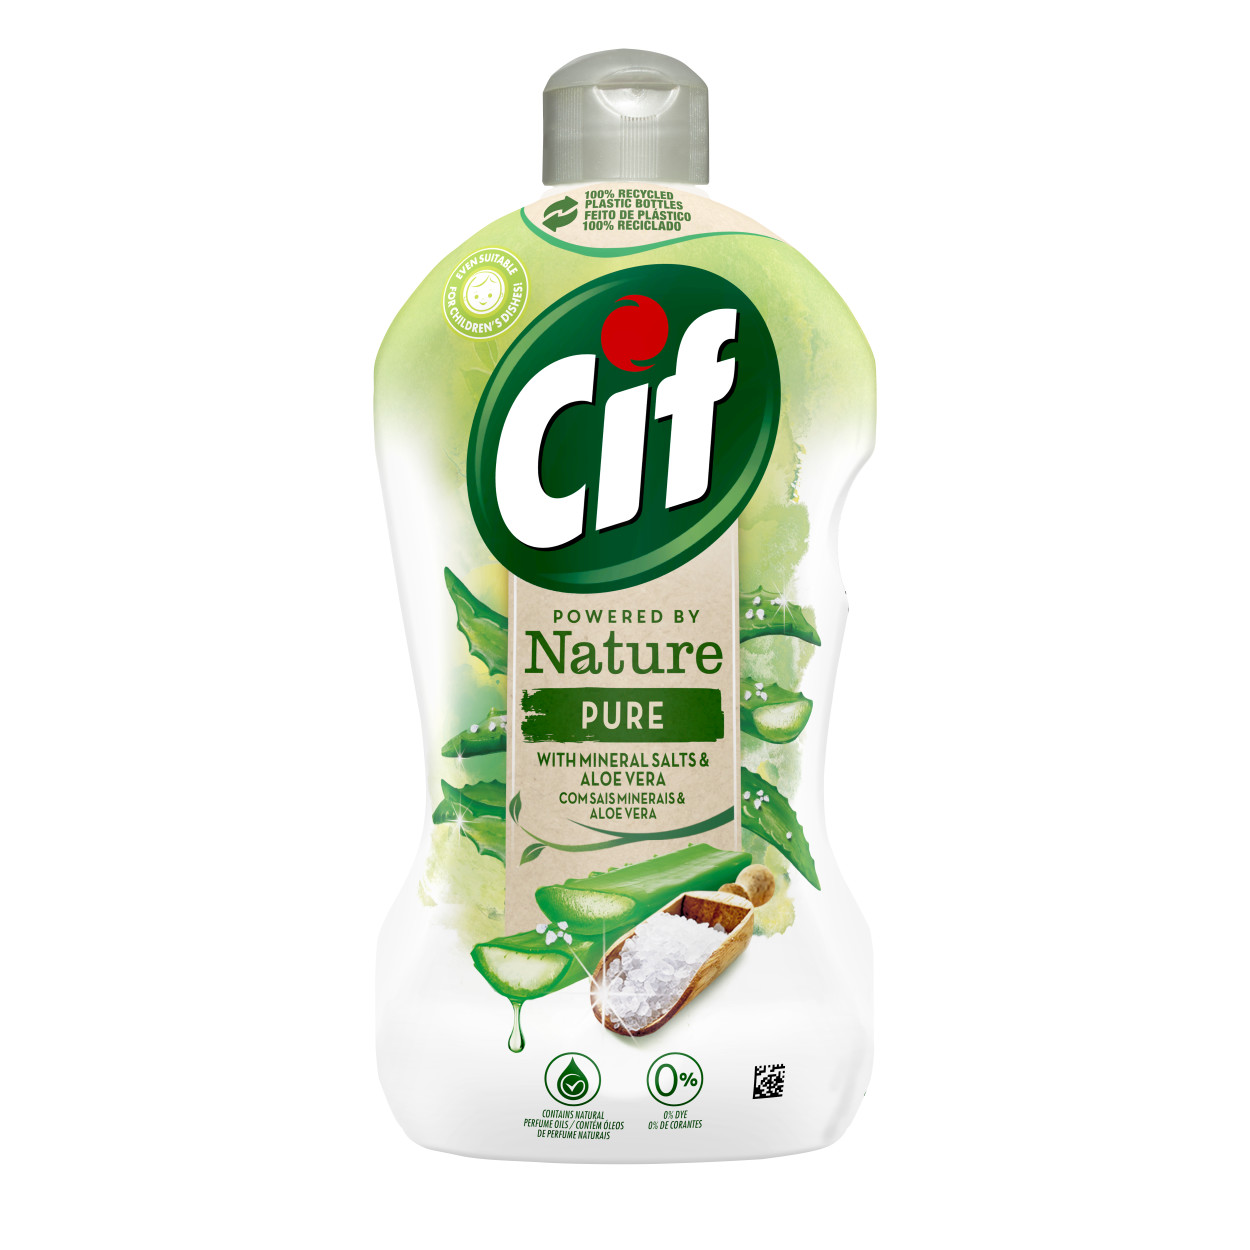 Cif Powered by Nature Pure Mosogatószer with Mineral Salts and Aloe Vera csomag lövés